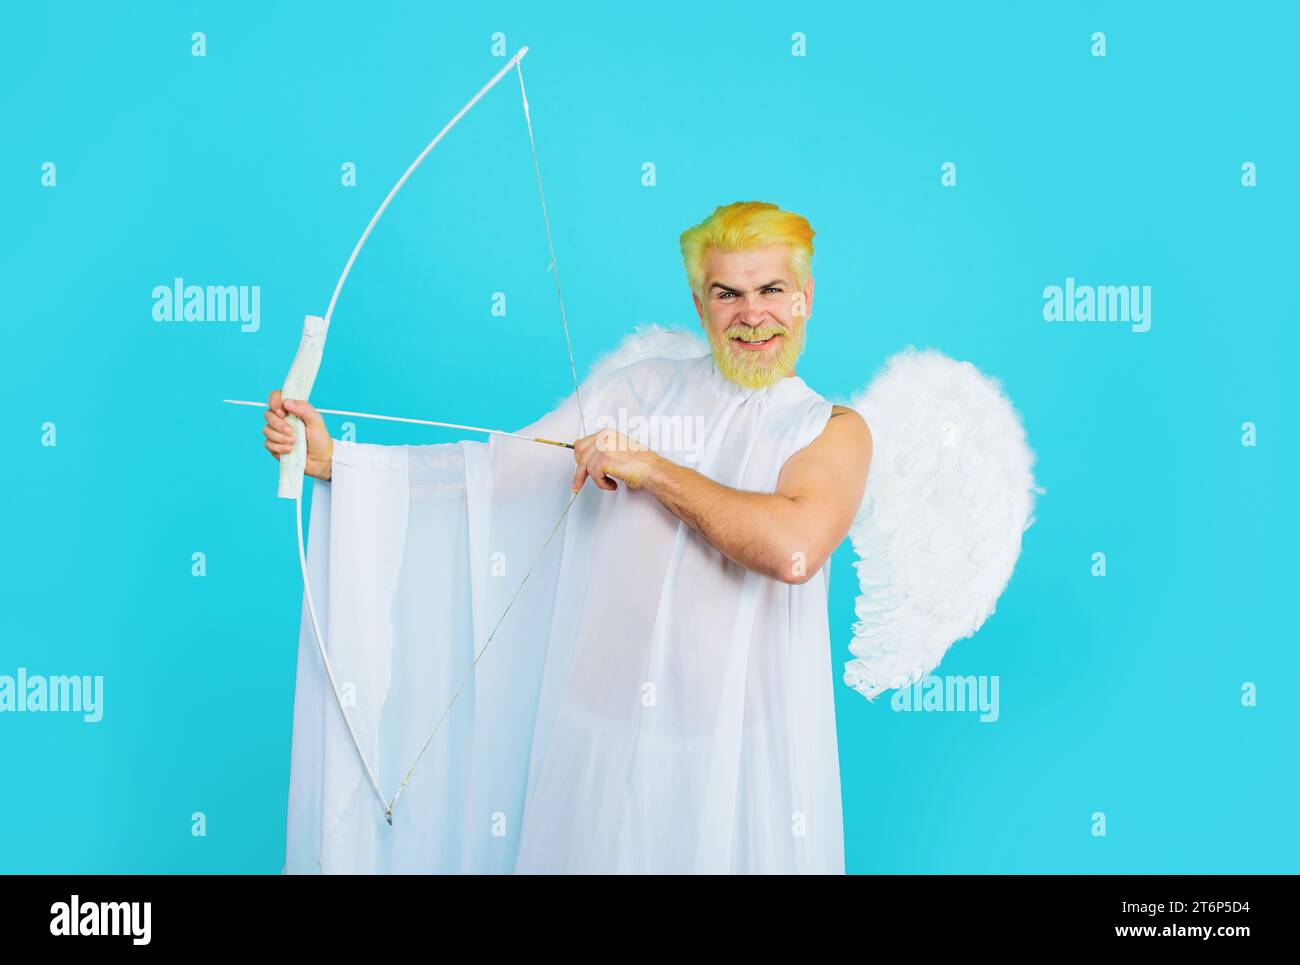 Valentine angel in white wings shoots love arrow from bow. Valentines Day celebration. Arrow of love. Smiling bearded man in angel costume shooting Stock Photo